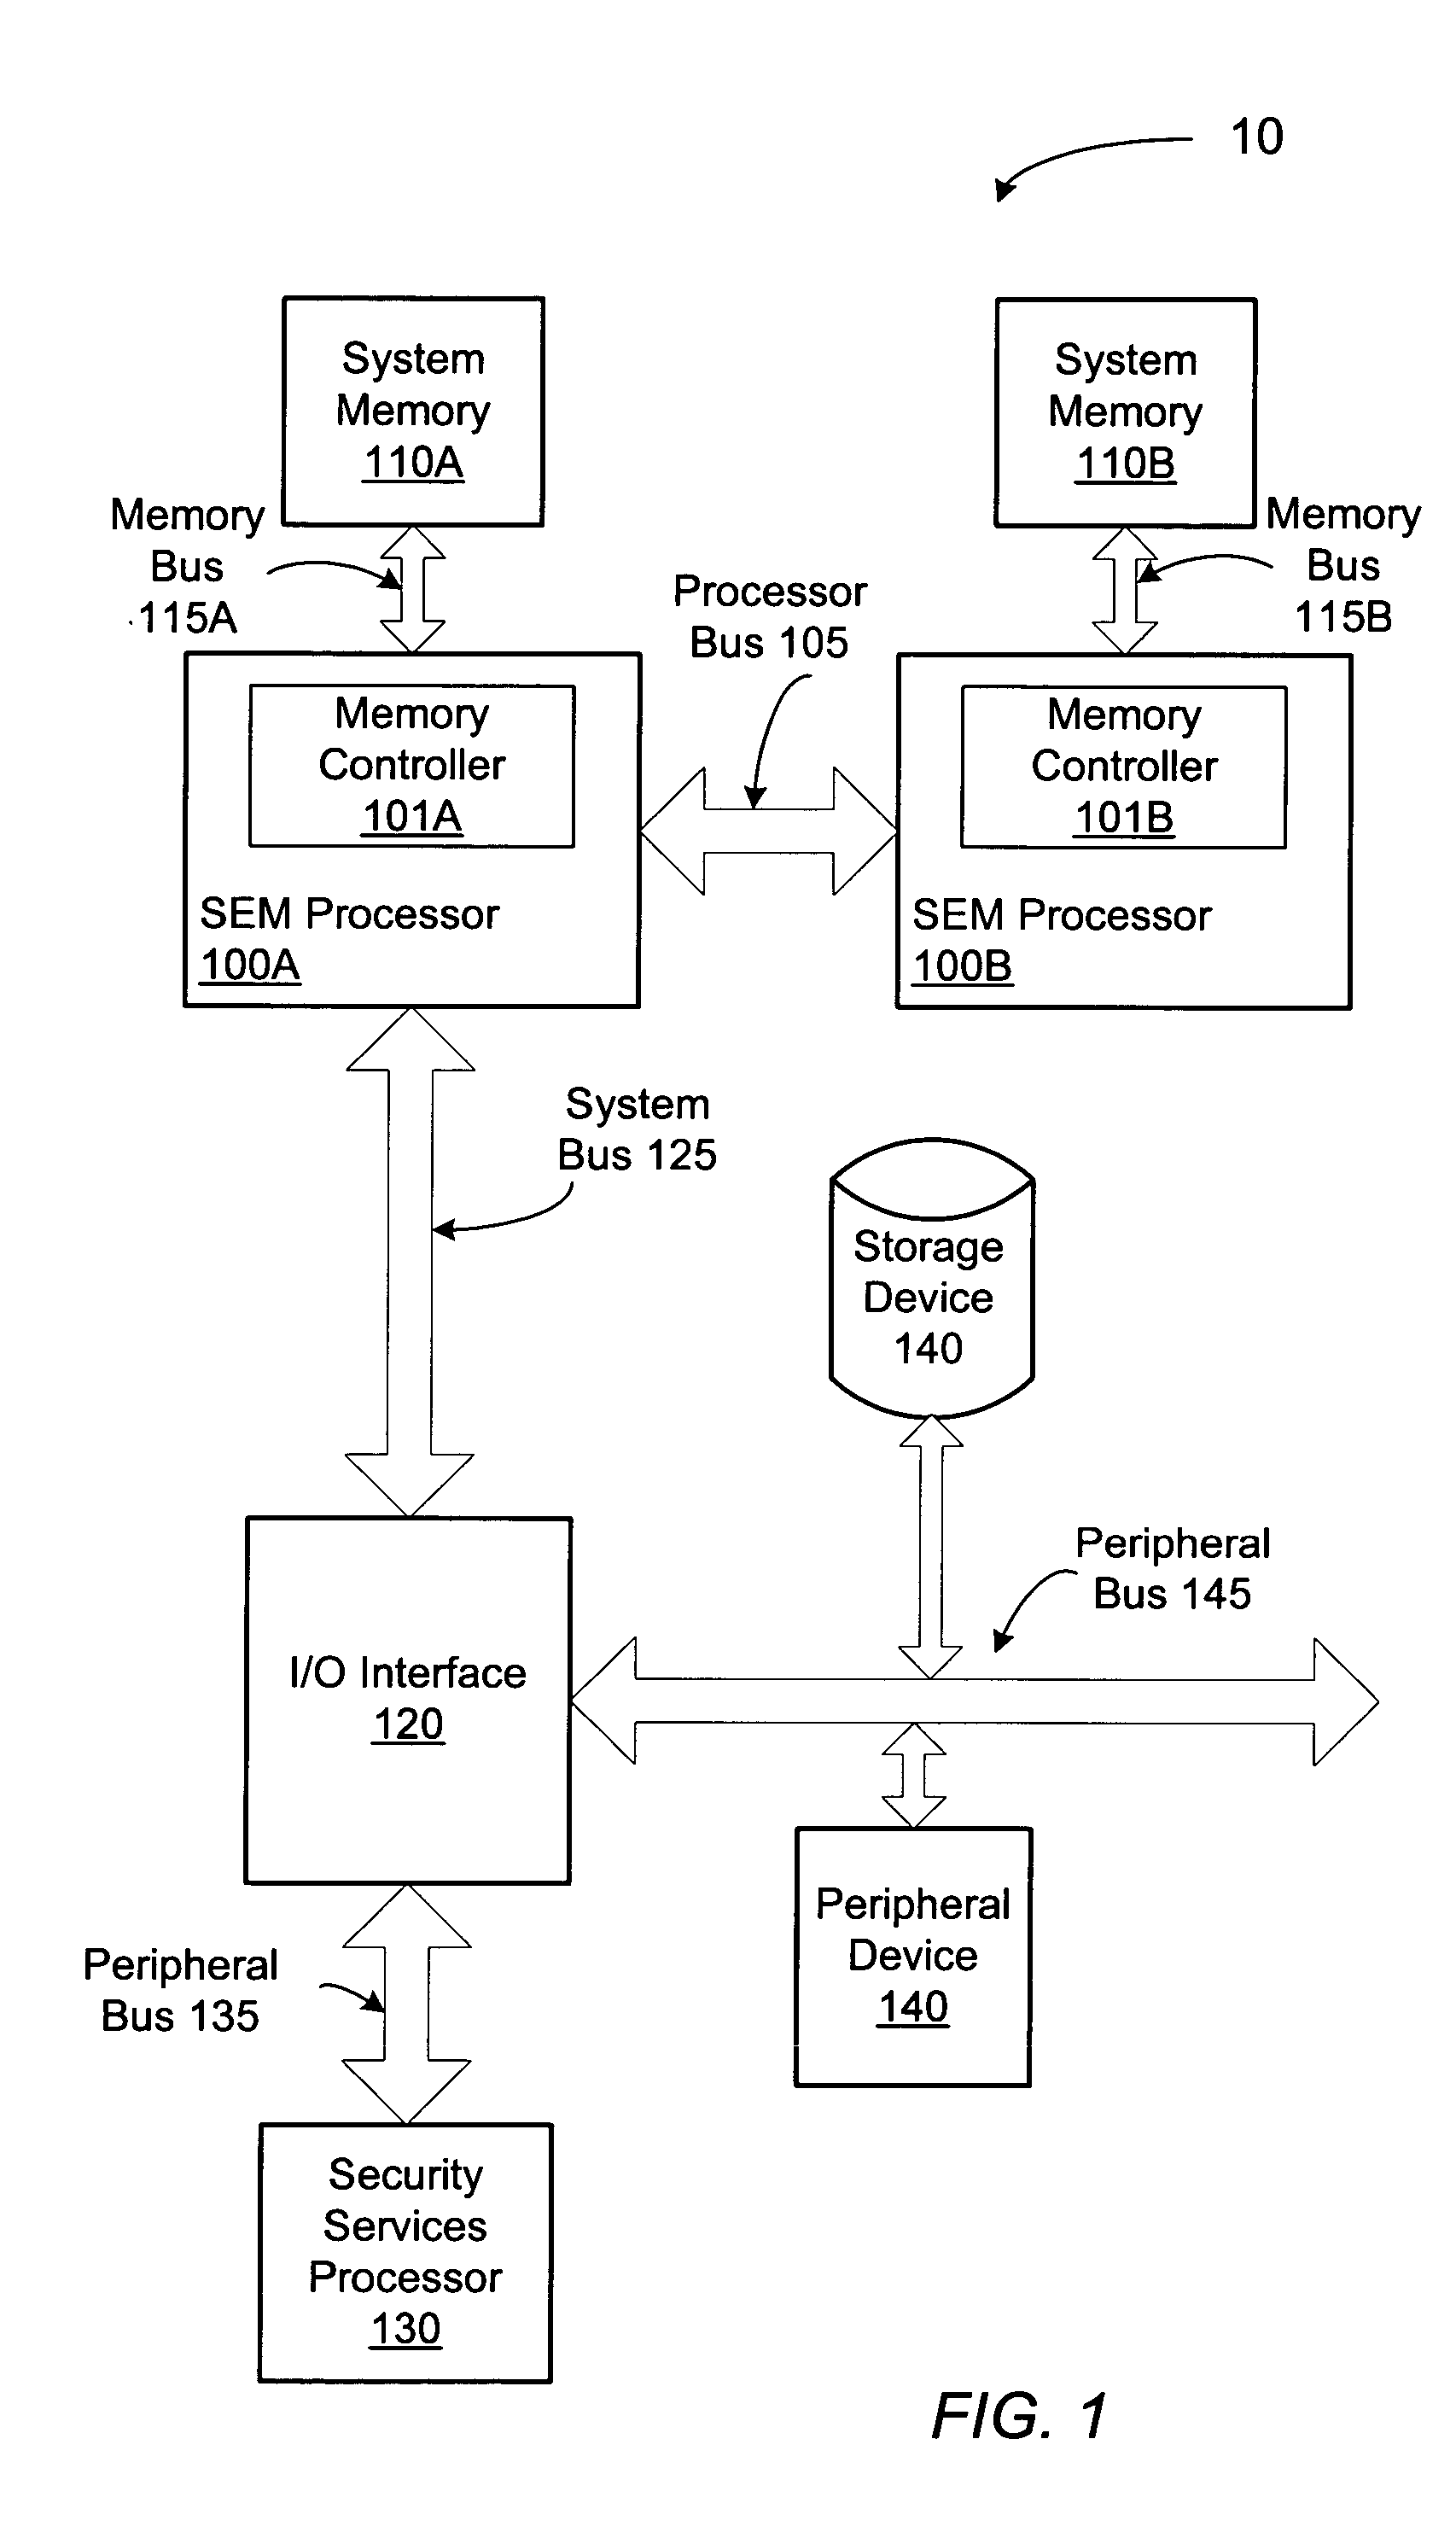 Computer system employing a trusted execution environment including a memory controller configured to clear memory